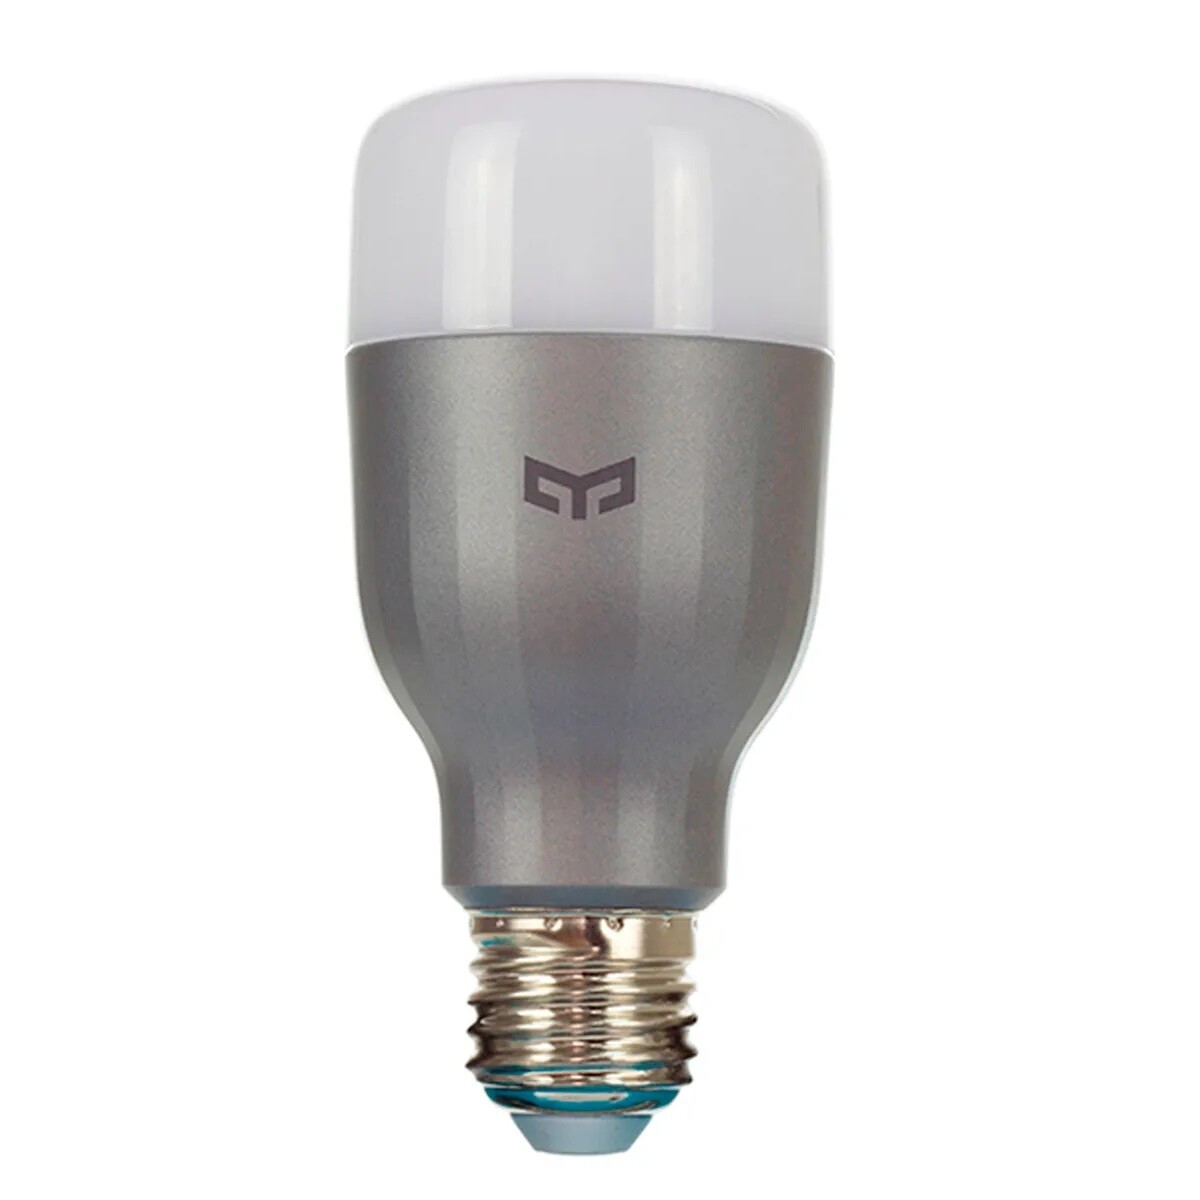 Xiaomi Mi Smart Led Bulb White And Color 950lm 